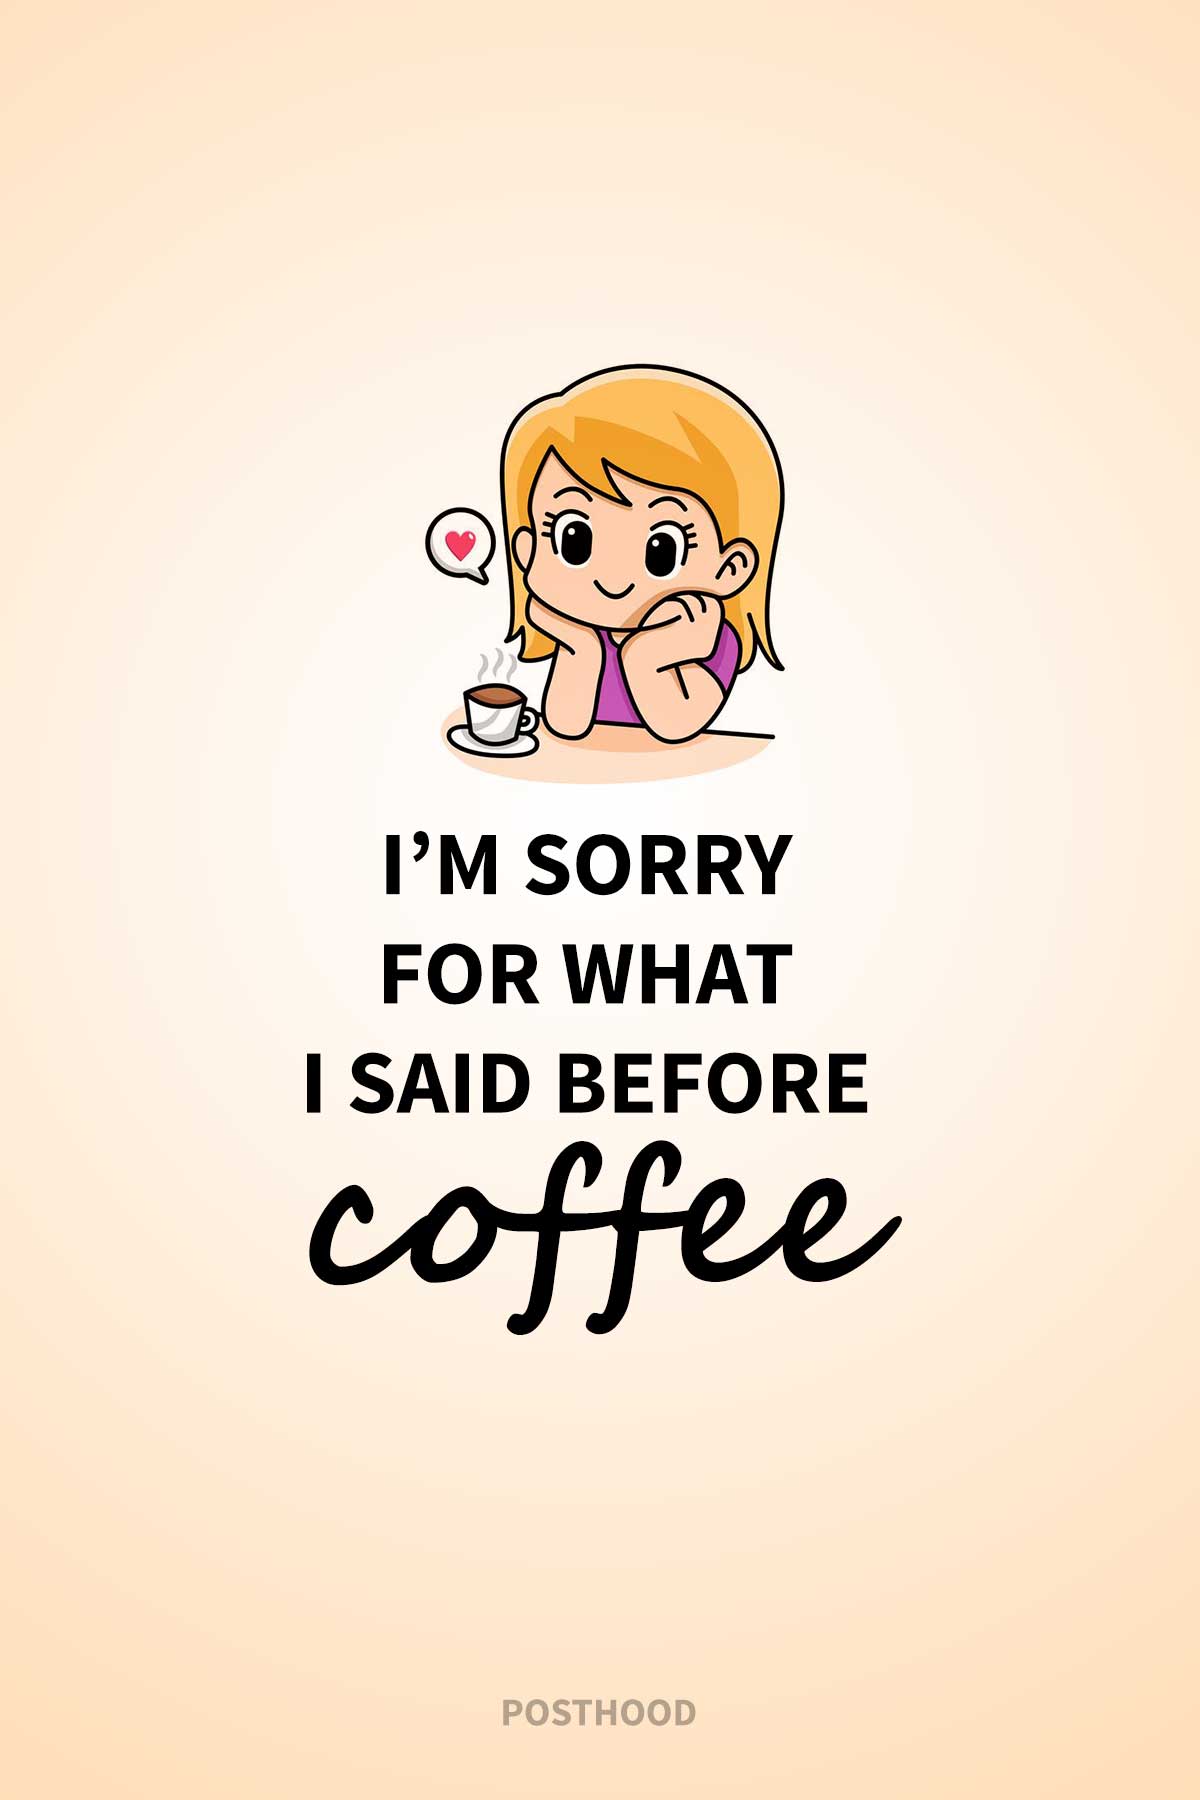 Get the right kind of boost to start your day with these fun and humorous coffee quotes that will blow your mind.